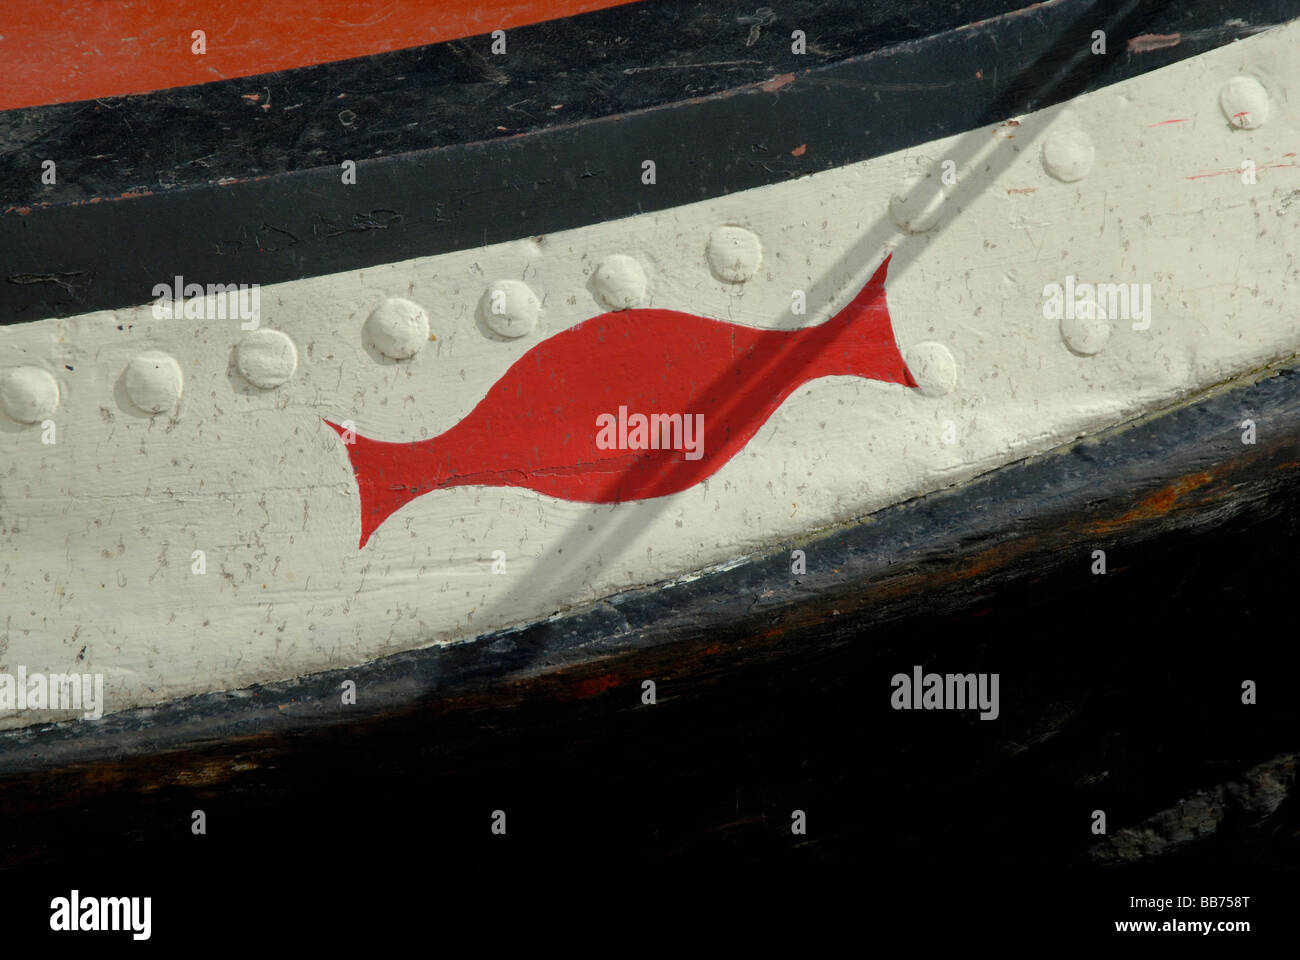 Red double curved lozenge shape decoration painted on rivetted bow of old working narrowboat, London, England Stock Photo